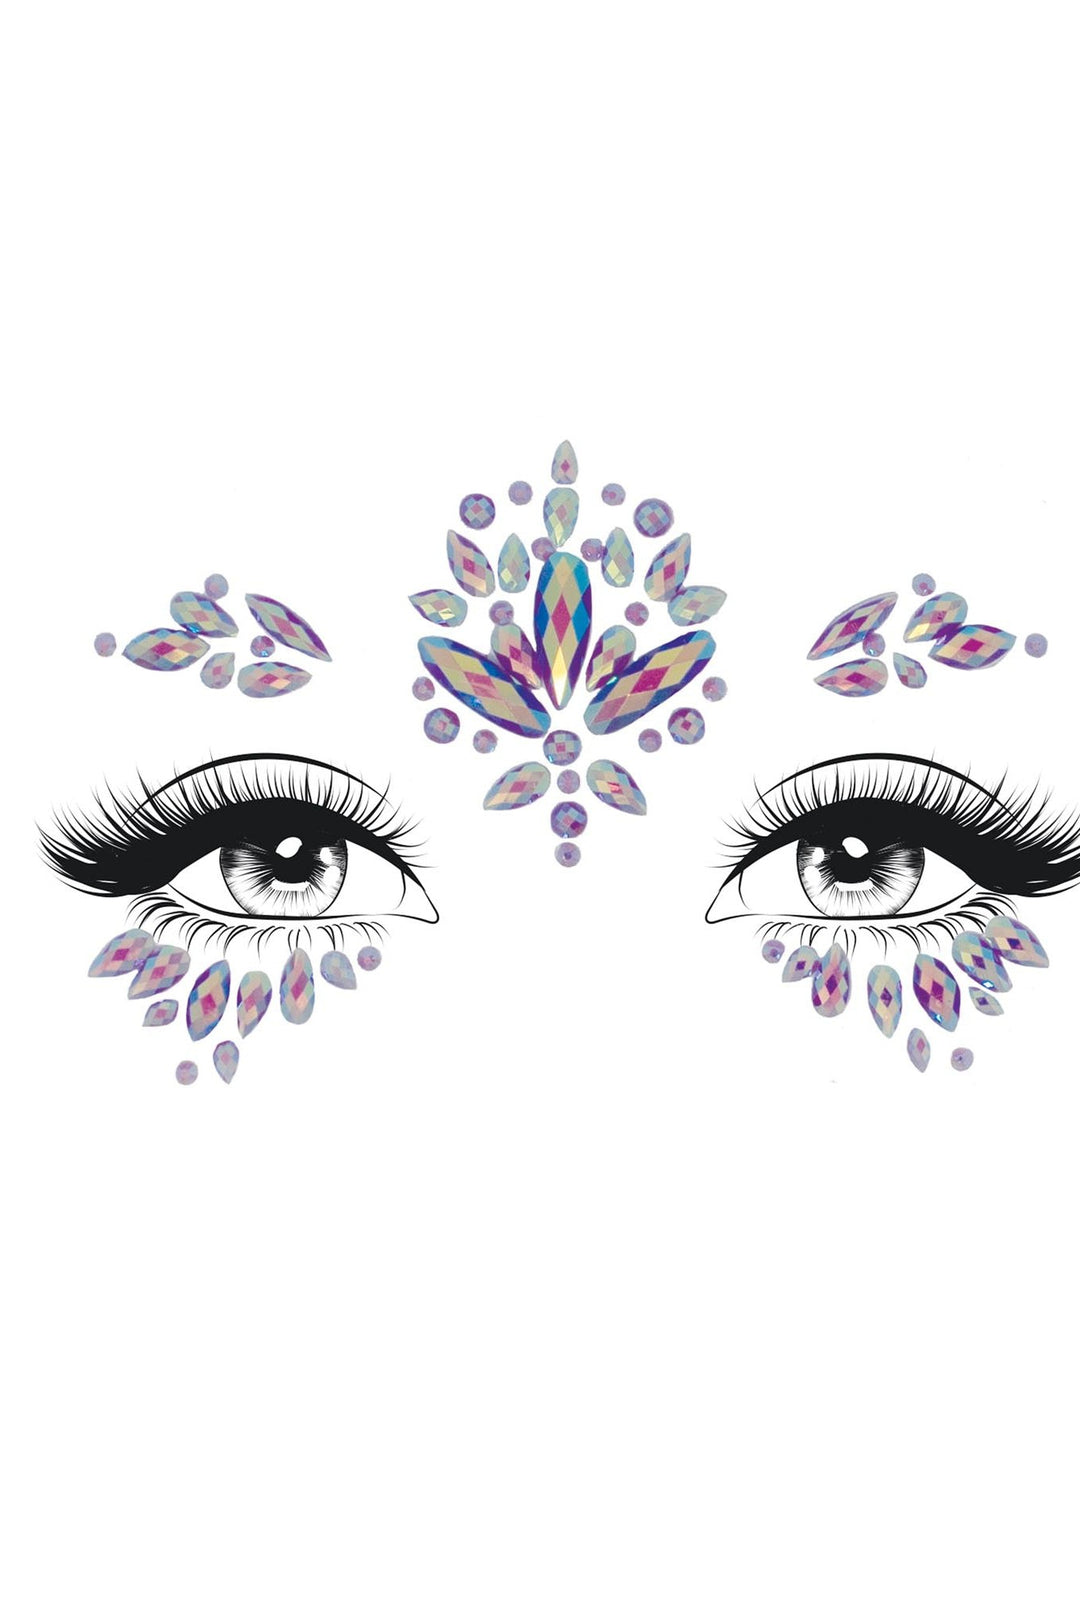 Verity Adhesive Face Jewels Sticker